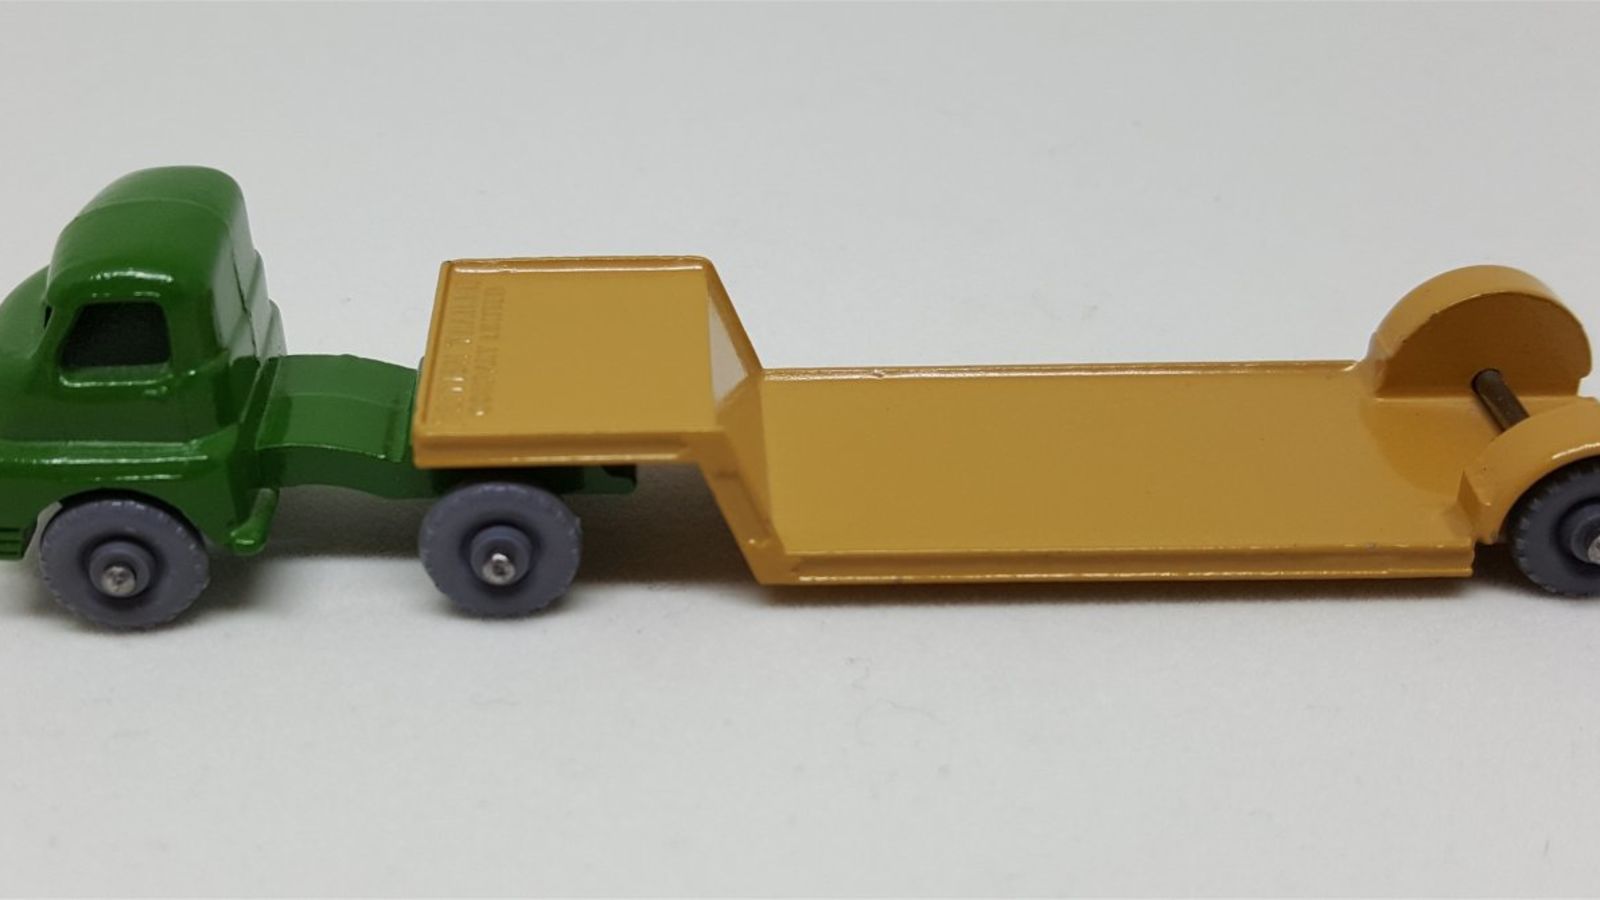 Illustration for article titled [REVIEW] Lesney Matchbox Bedford Low Loader - the small one